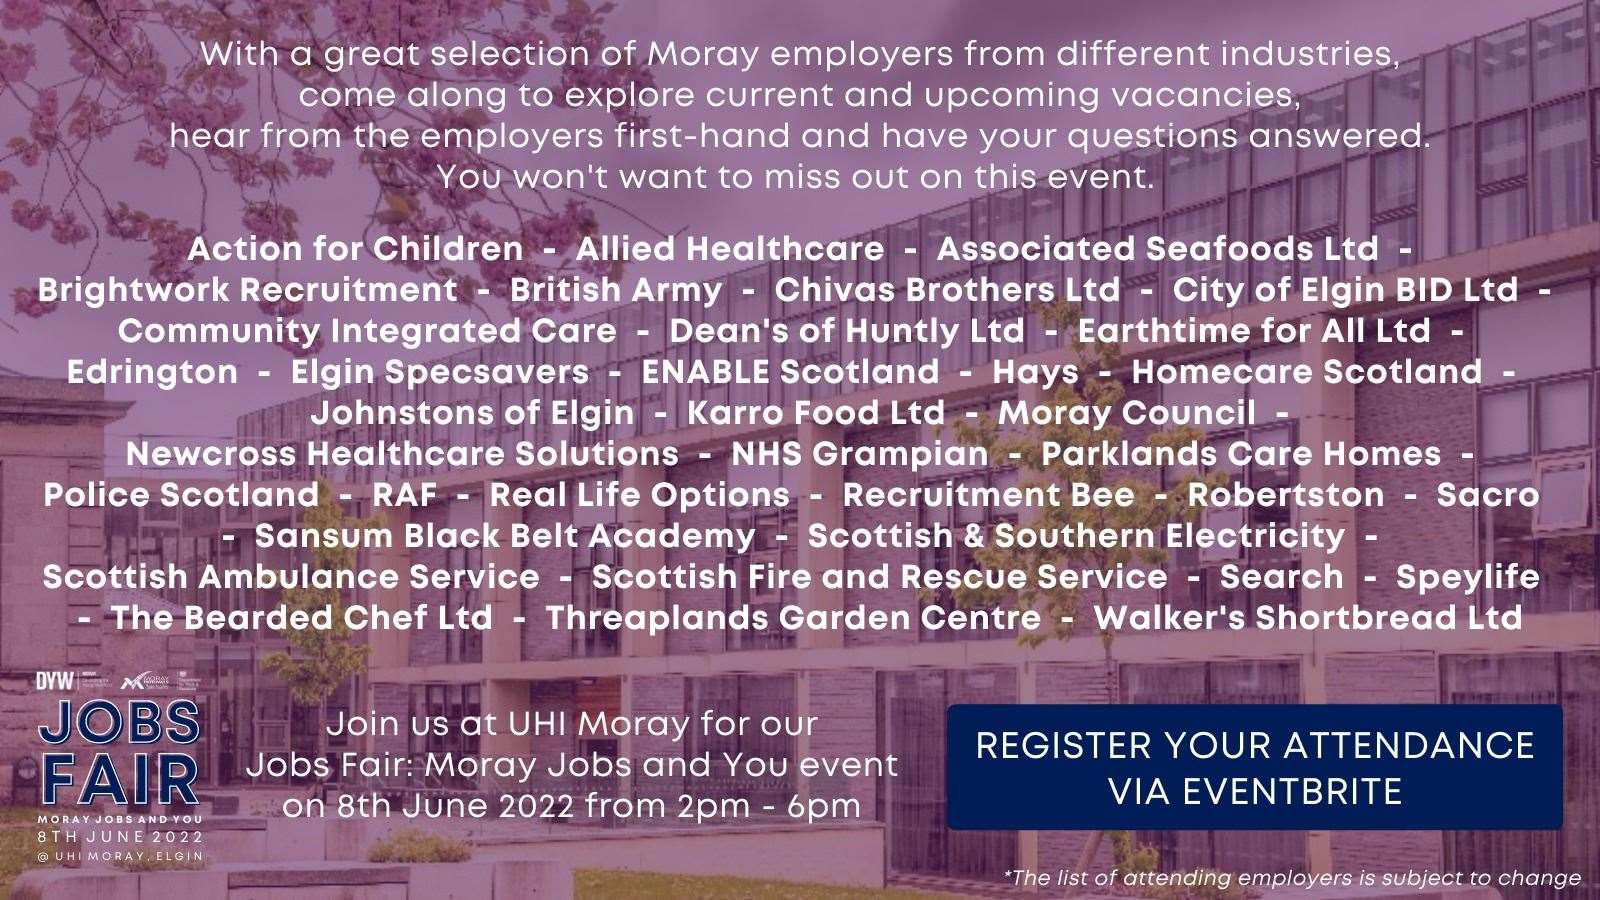 Over 35 employers have signed up for Moray Jobs Fair 2022.